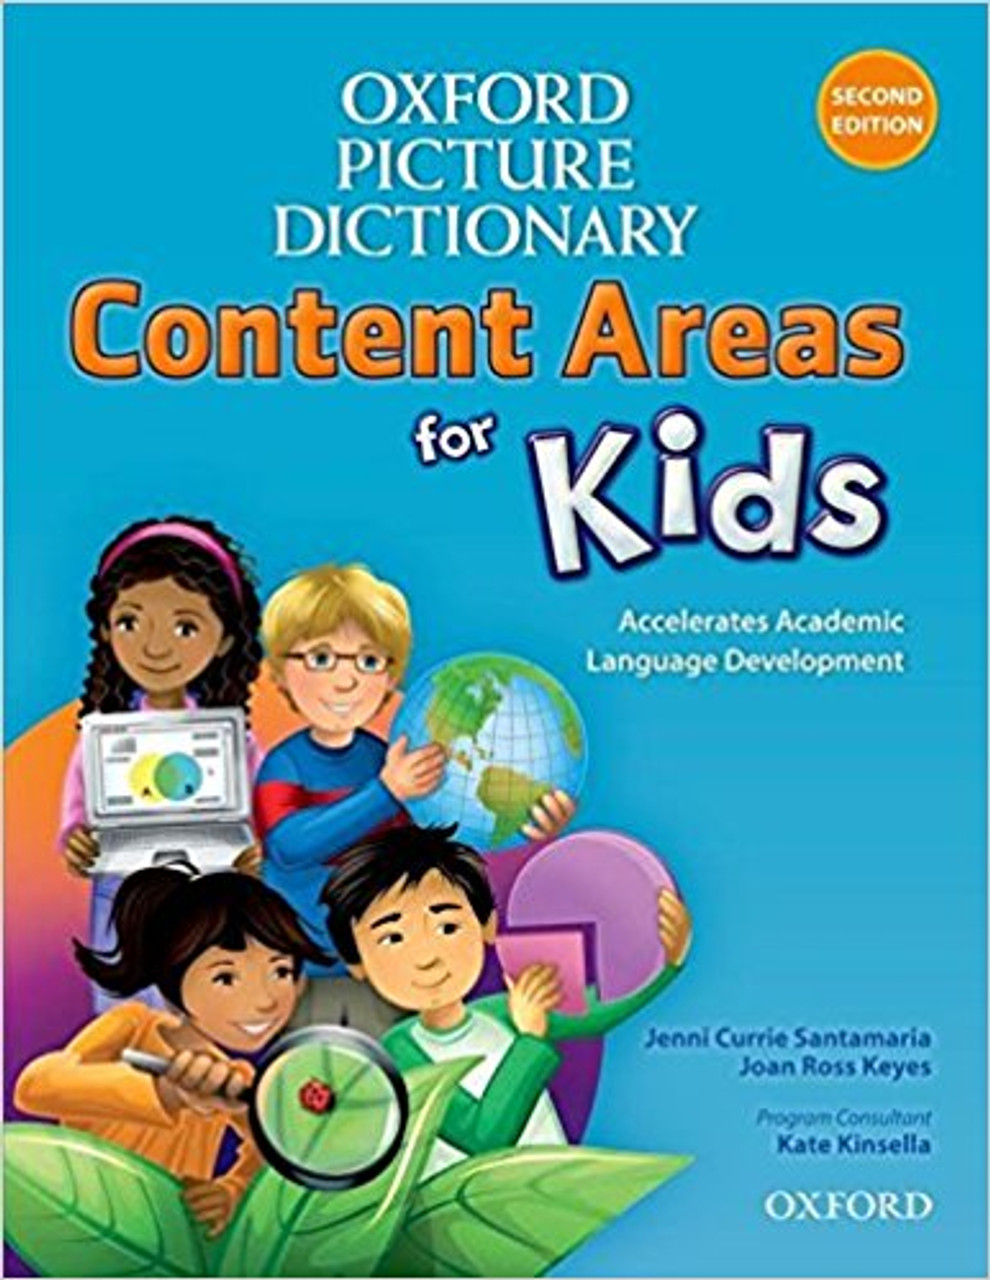 Oxford Picture Dictionary Content Areas for Kids by Jenni Currie Santamaria